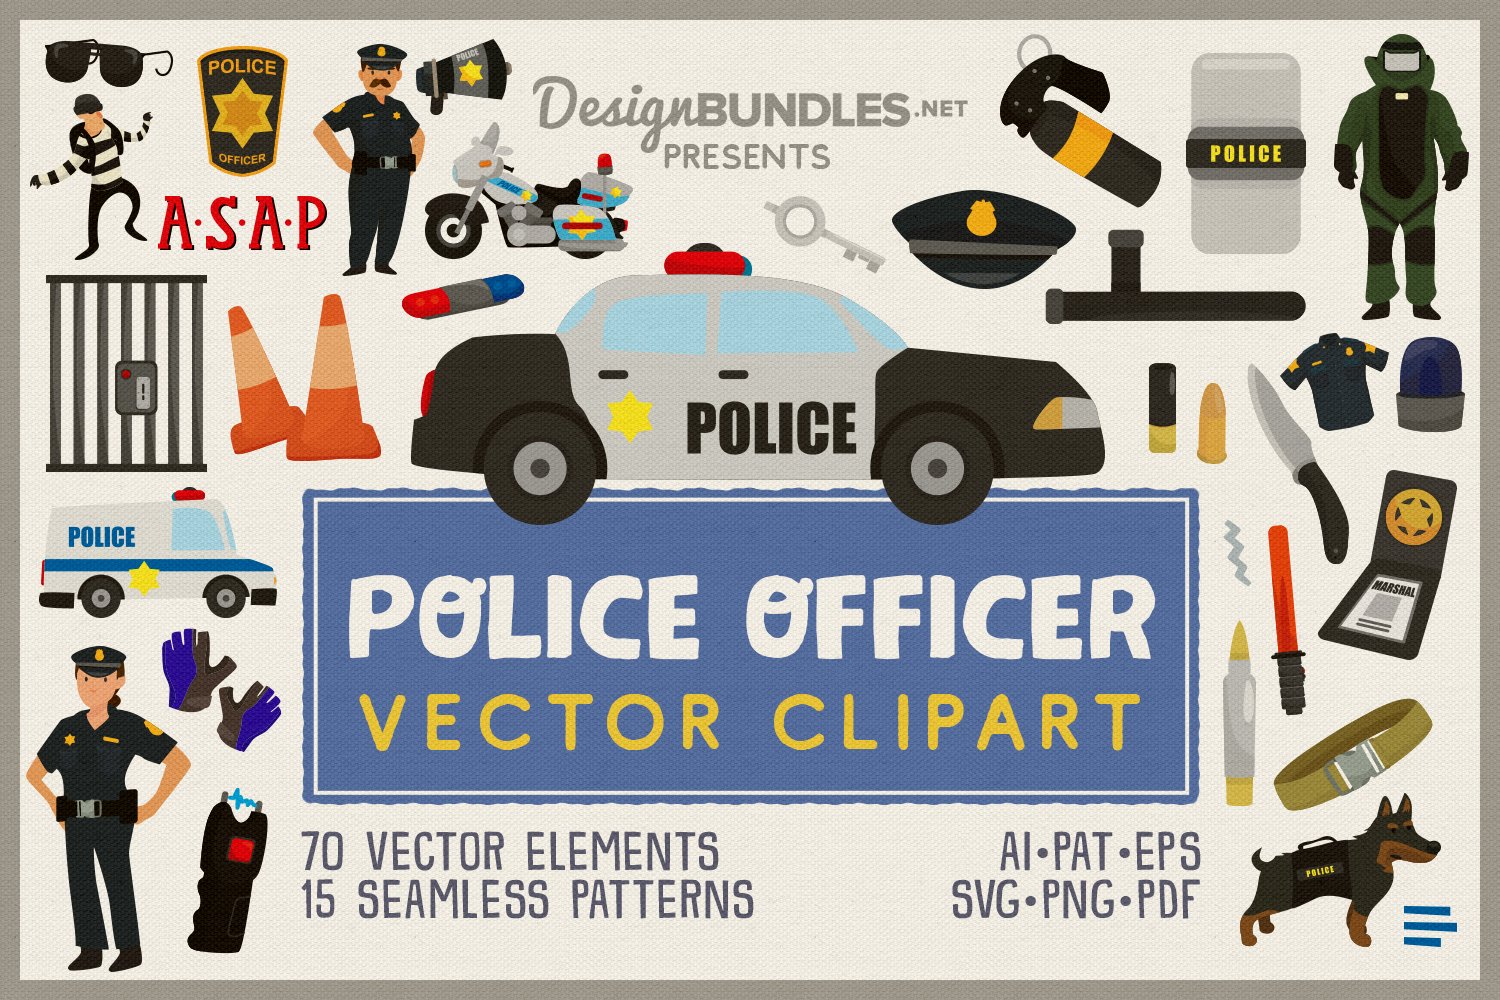 The white lettring "POLICE OFFICER" and the yellow lettering "Vector Clipart" on a blue background, and 30 different police officer elements on a grey background.